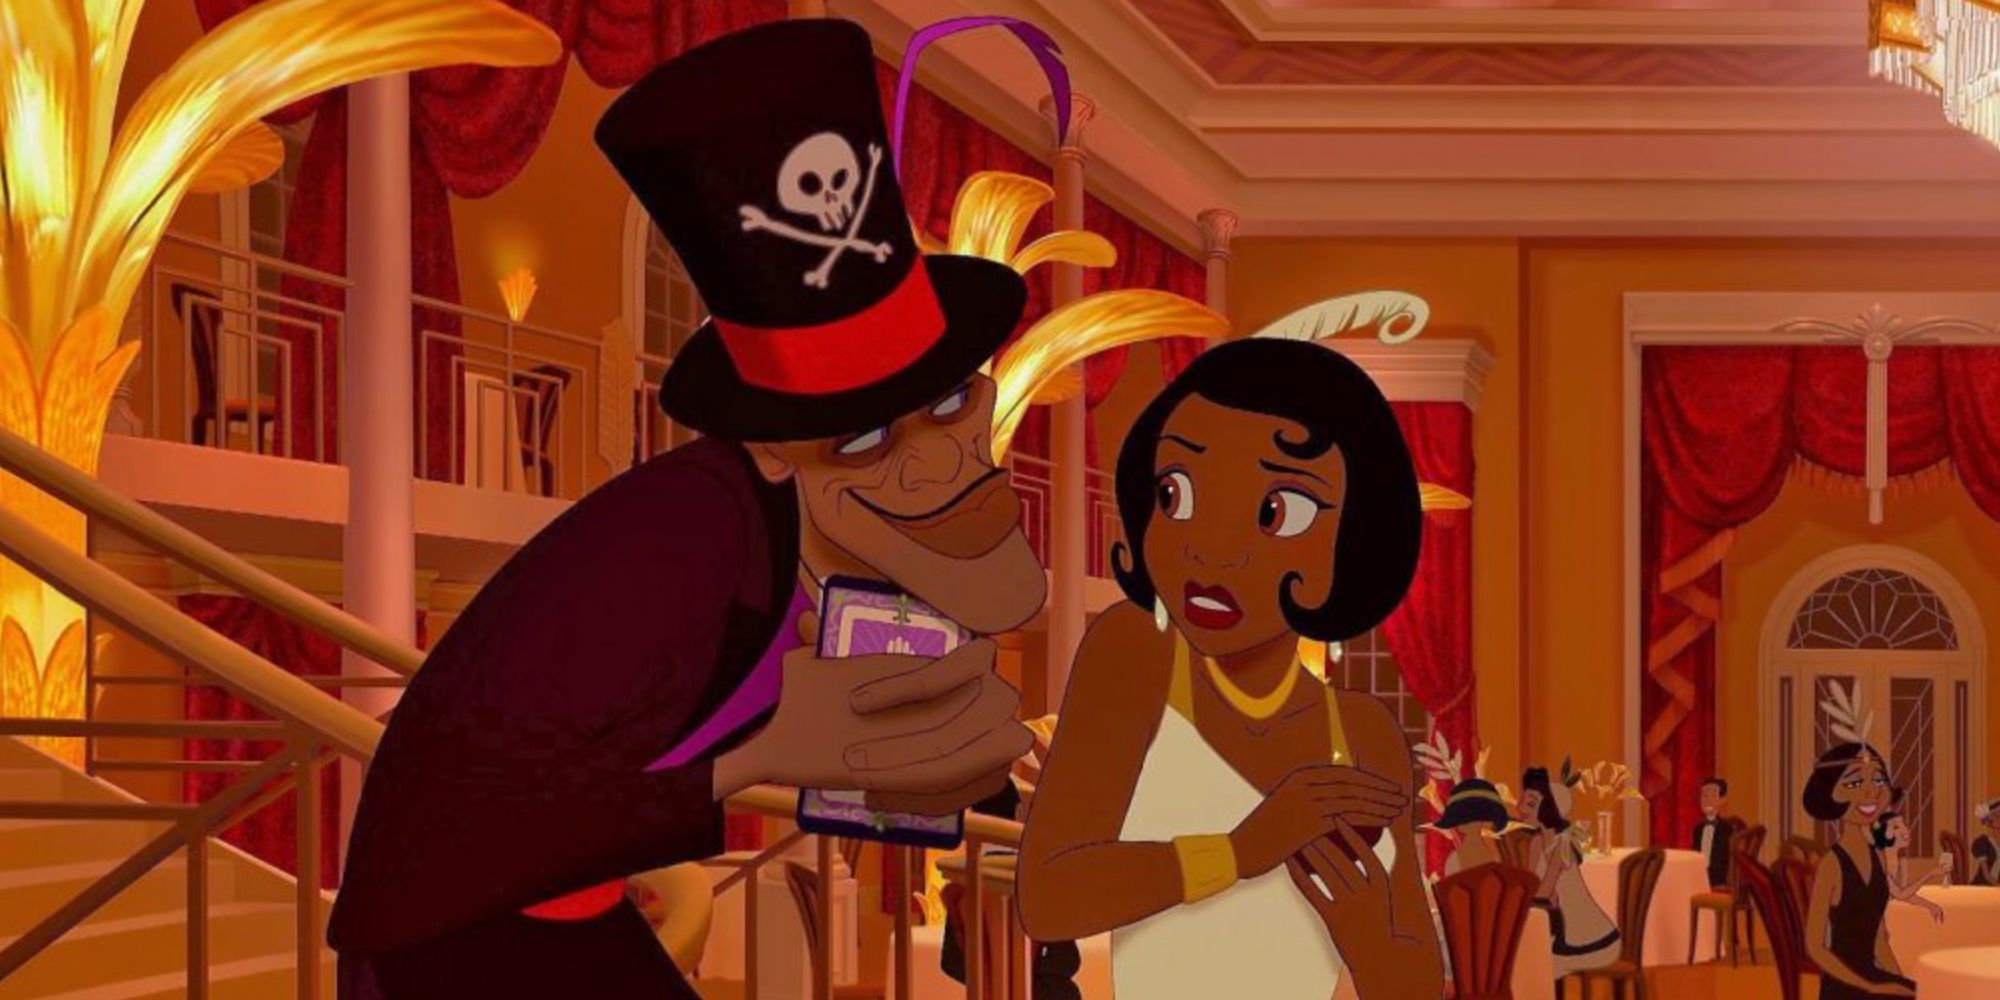 Facilier tries to con Tiana in an illusion in The Princess And The Frog